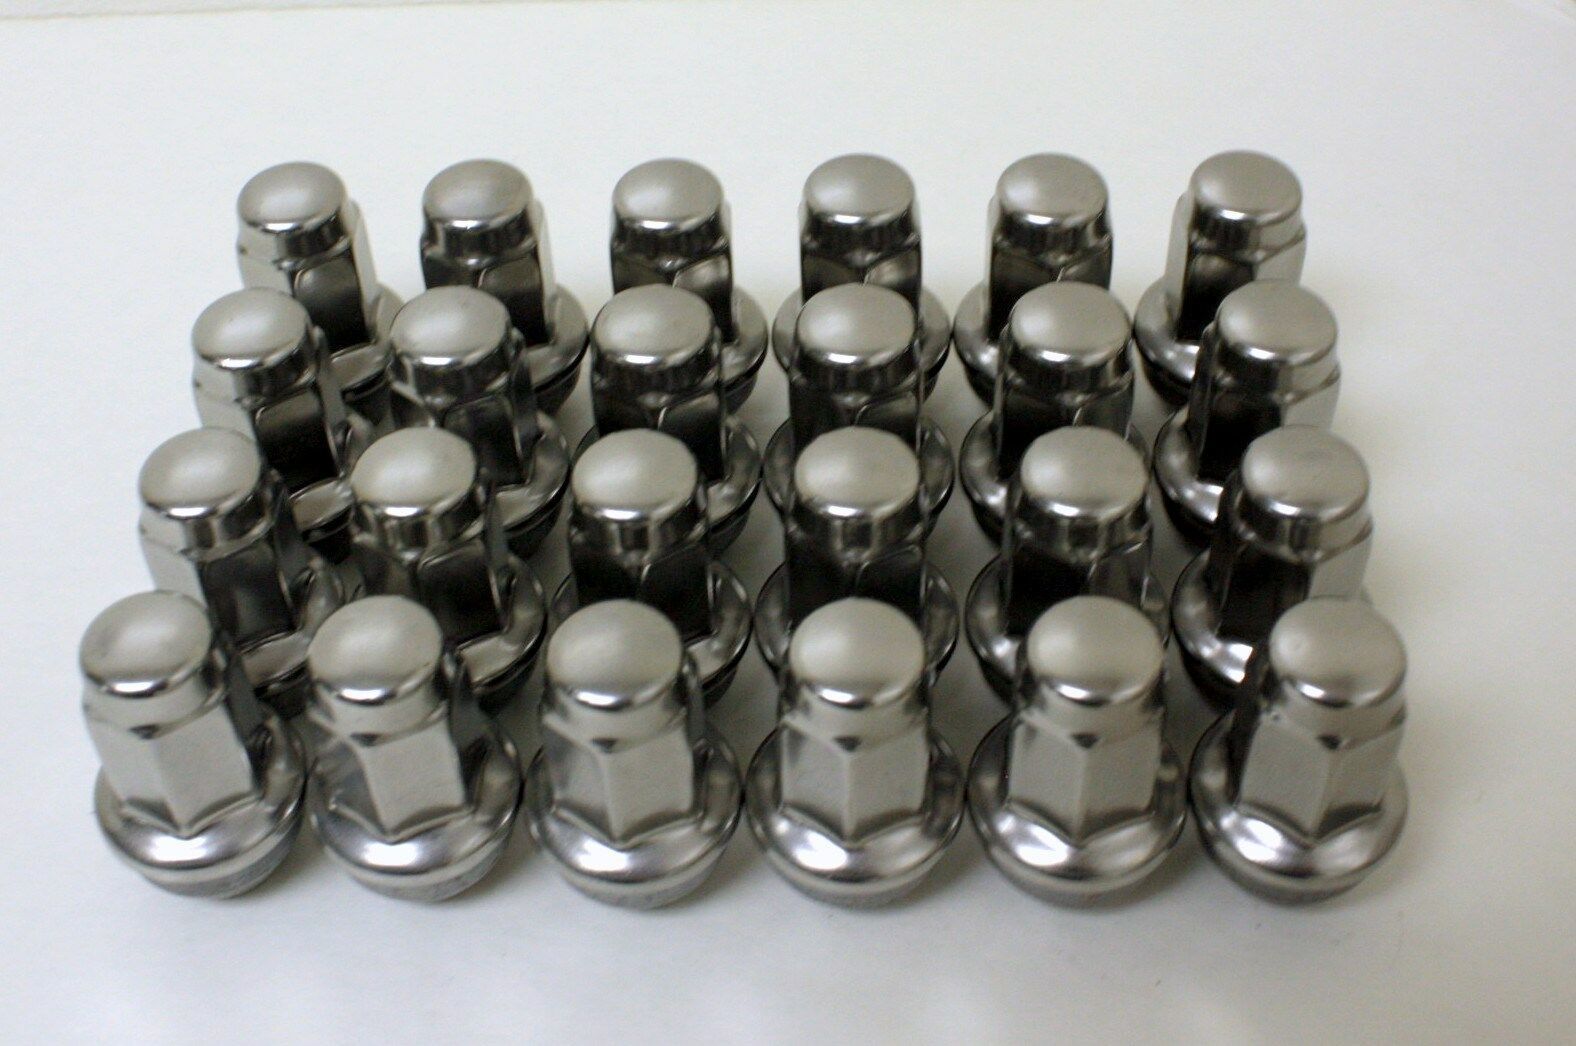 New 24 Ford F150 Expedition Factory OEM Polished Stainless Lugs Lug Nuts 2004-14 - $79.15